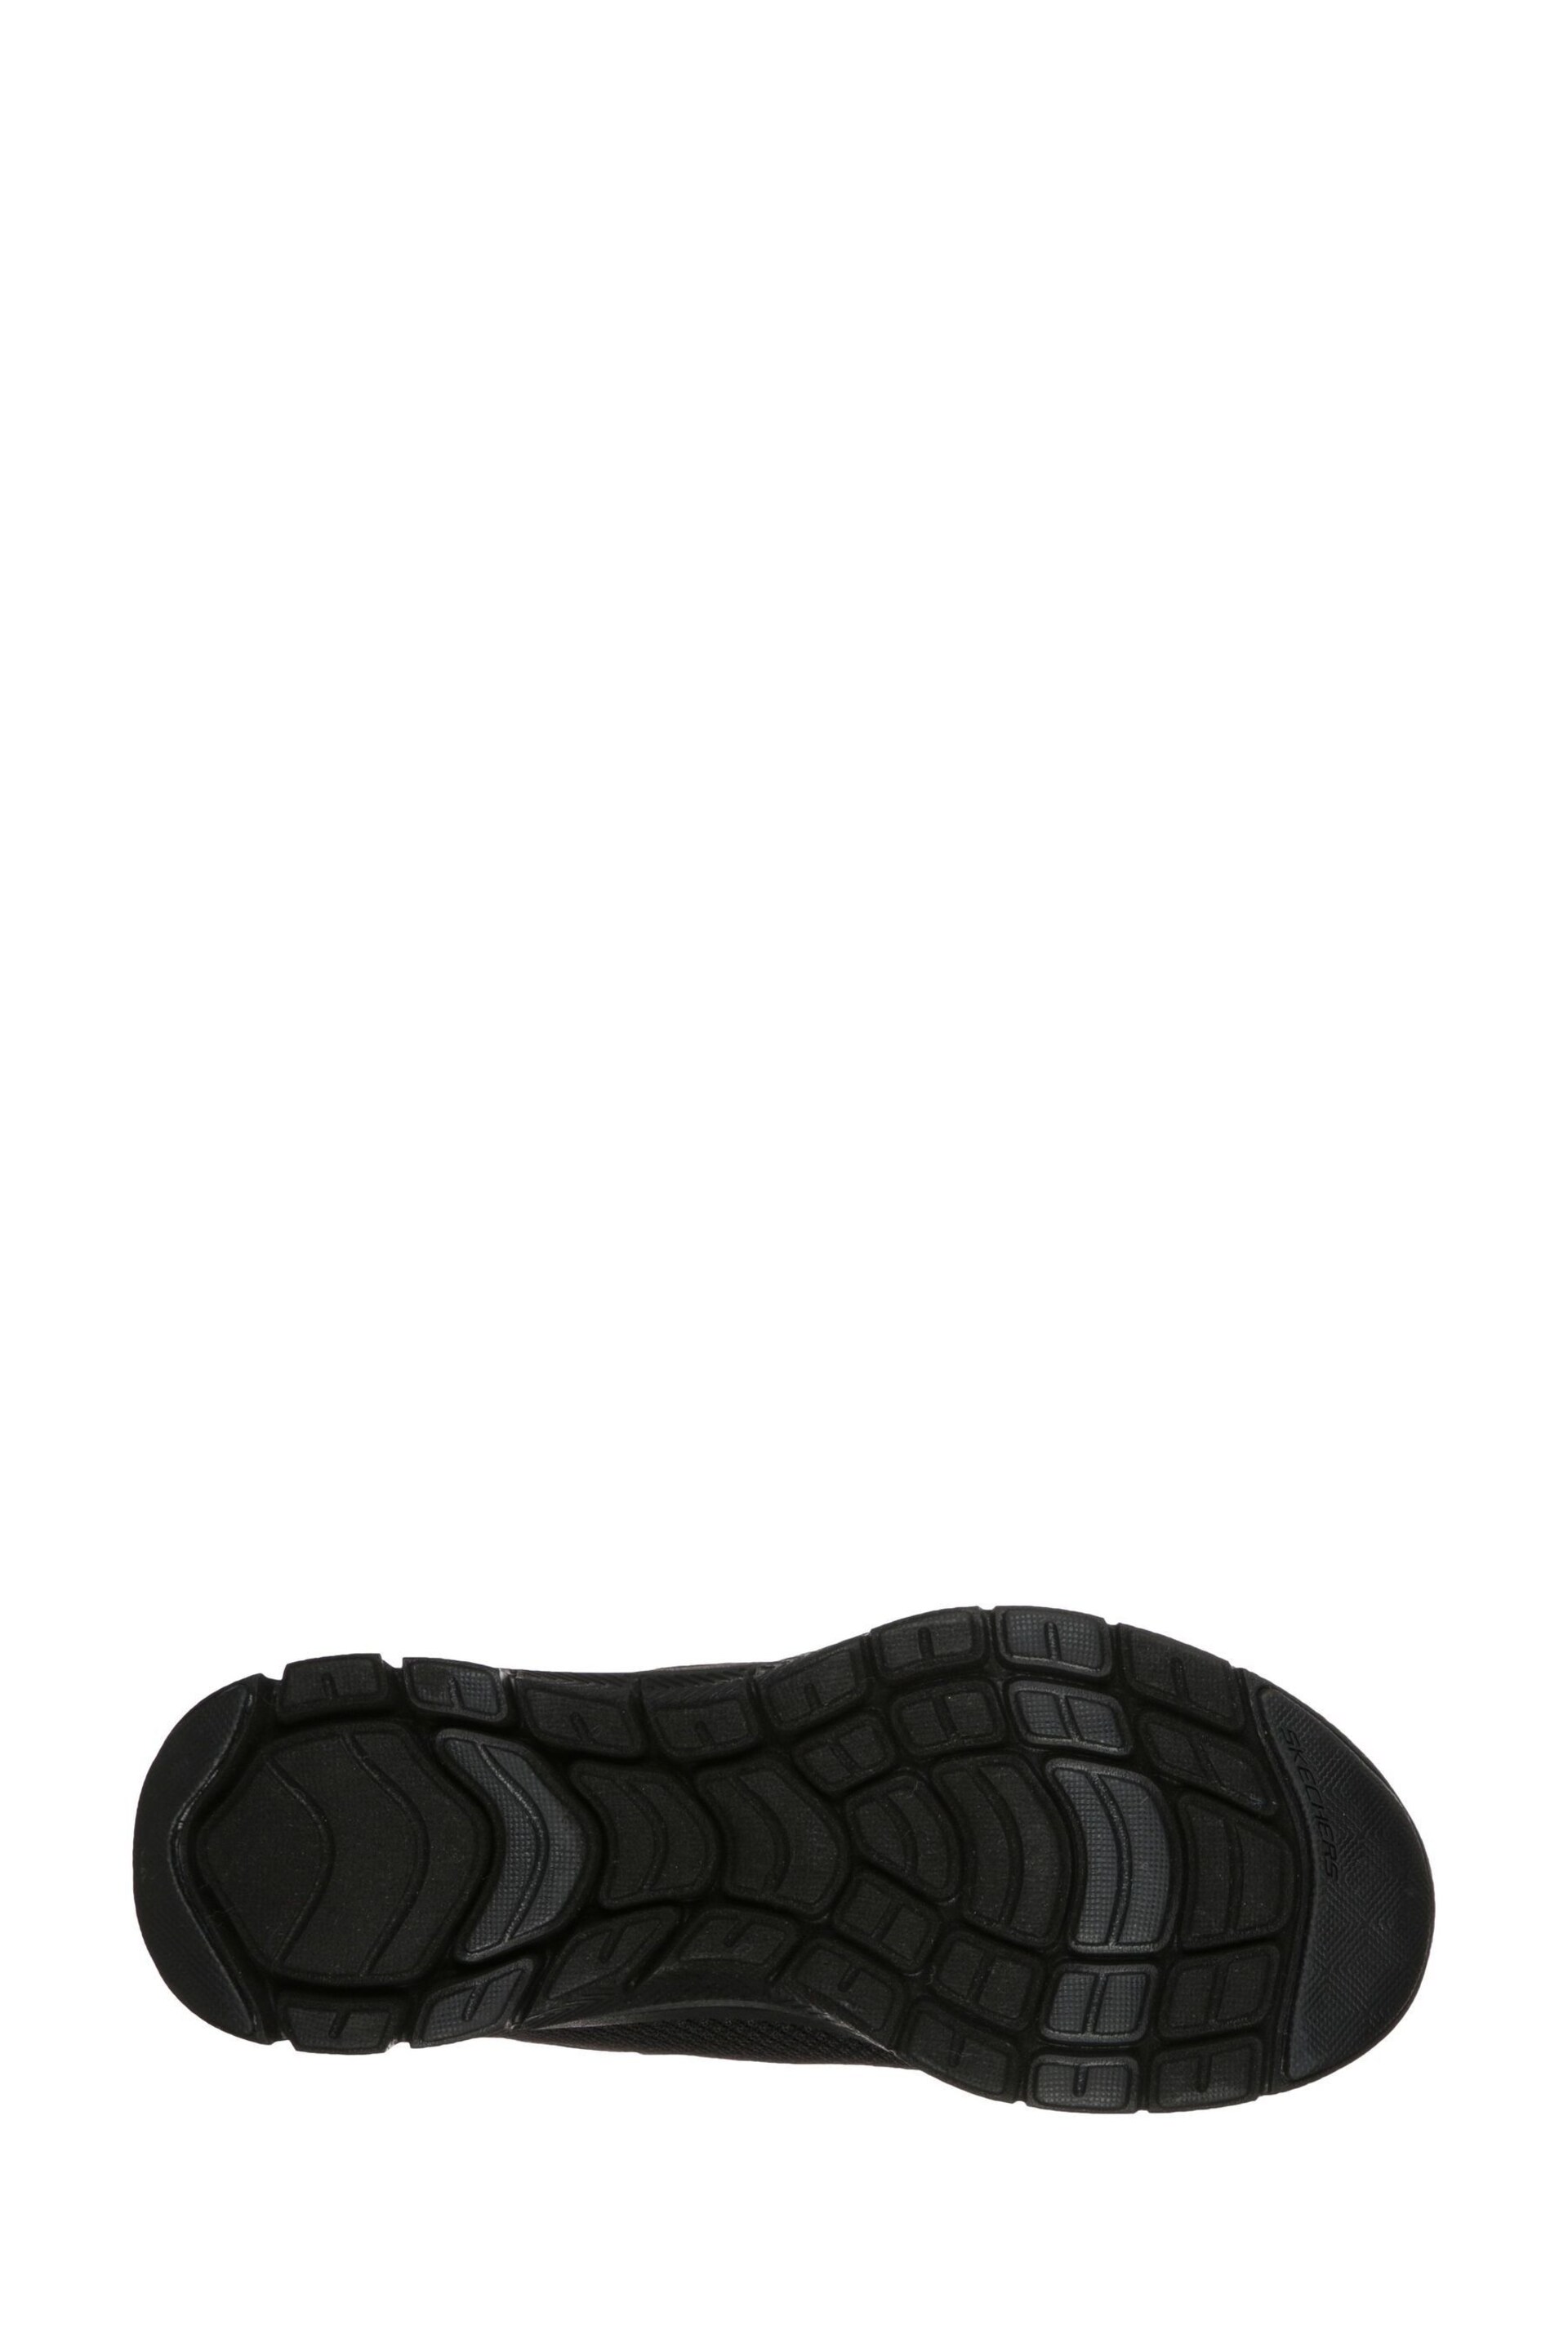 Skechers Black Flex Appeal 4.0 Brilliant View Womens Trainers - Image 6 of 8